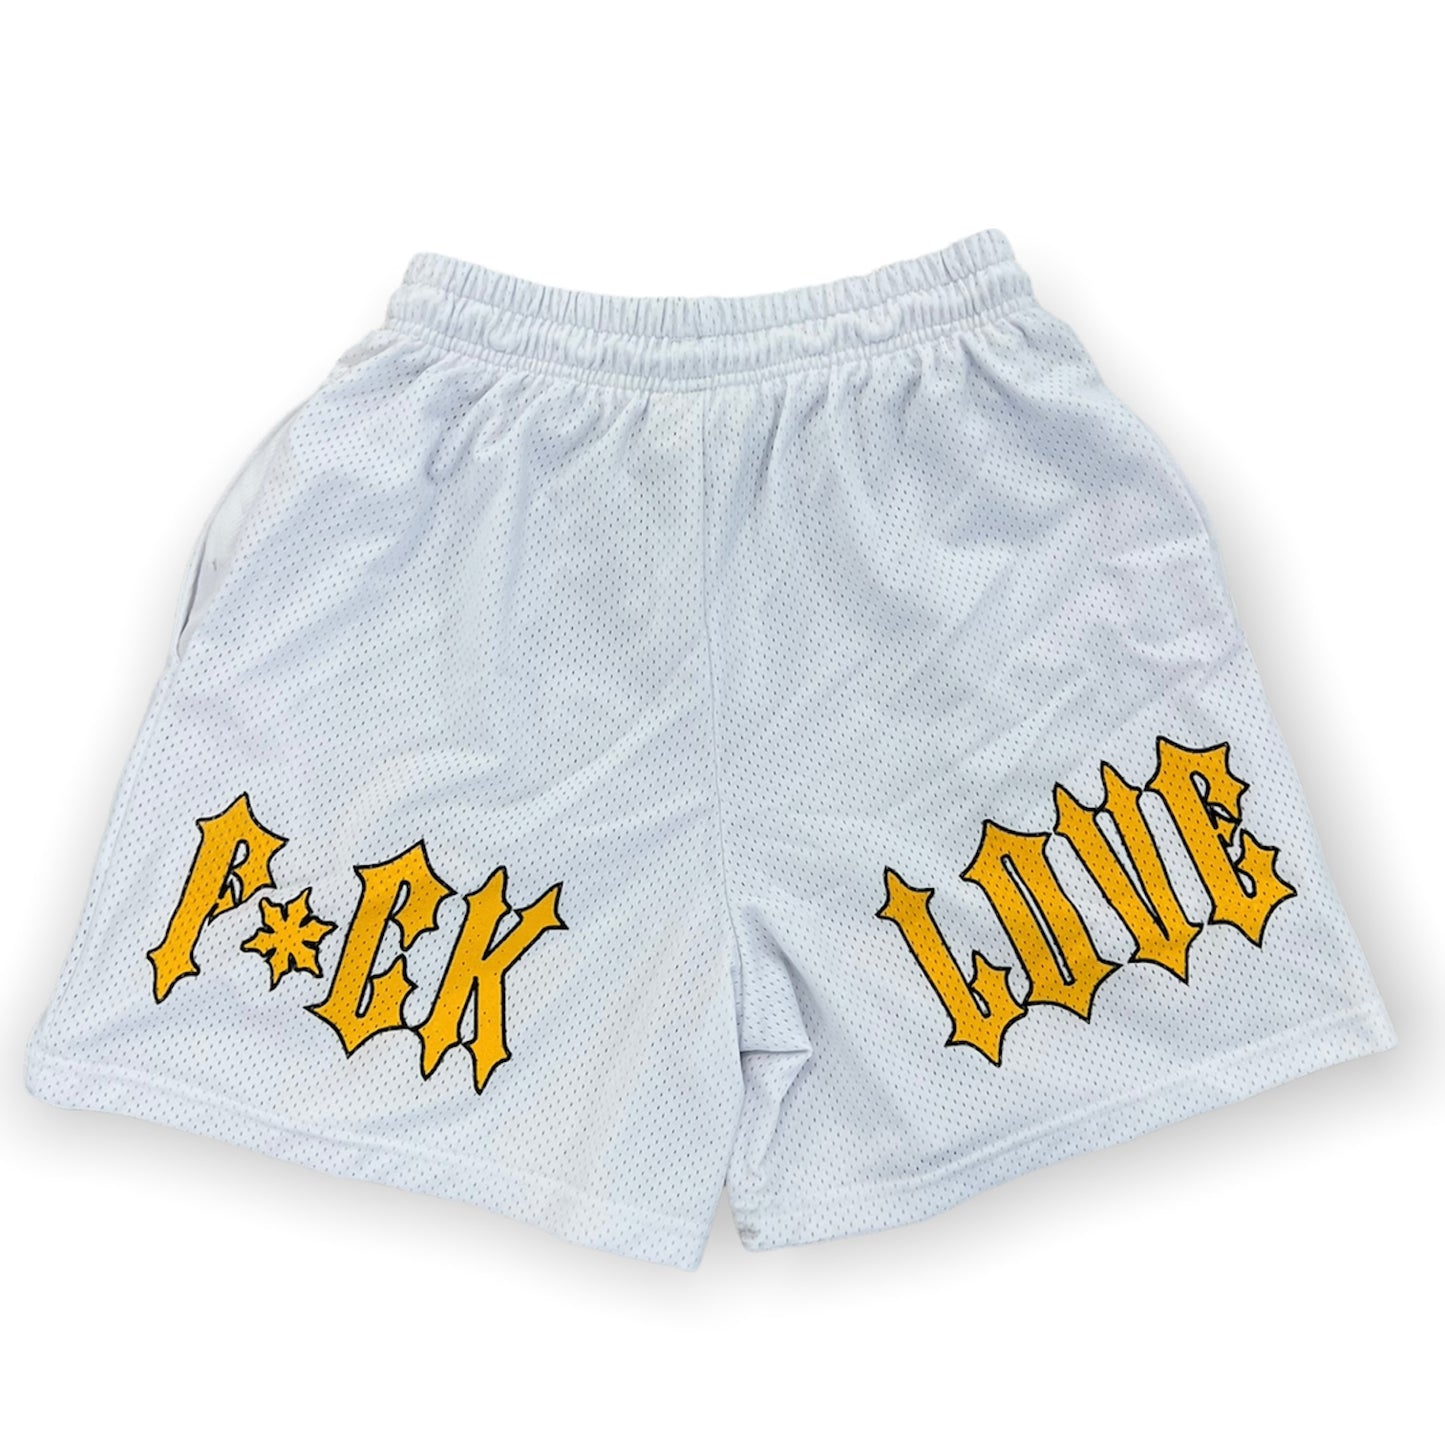 EVOL F*ck Love Shorts White and Yellow